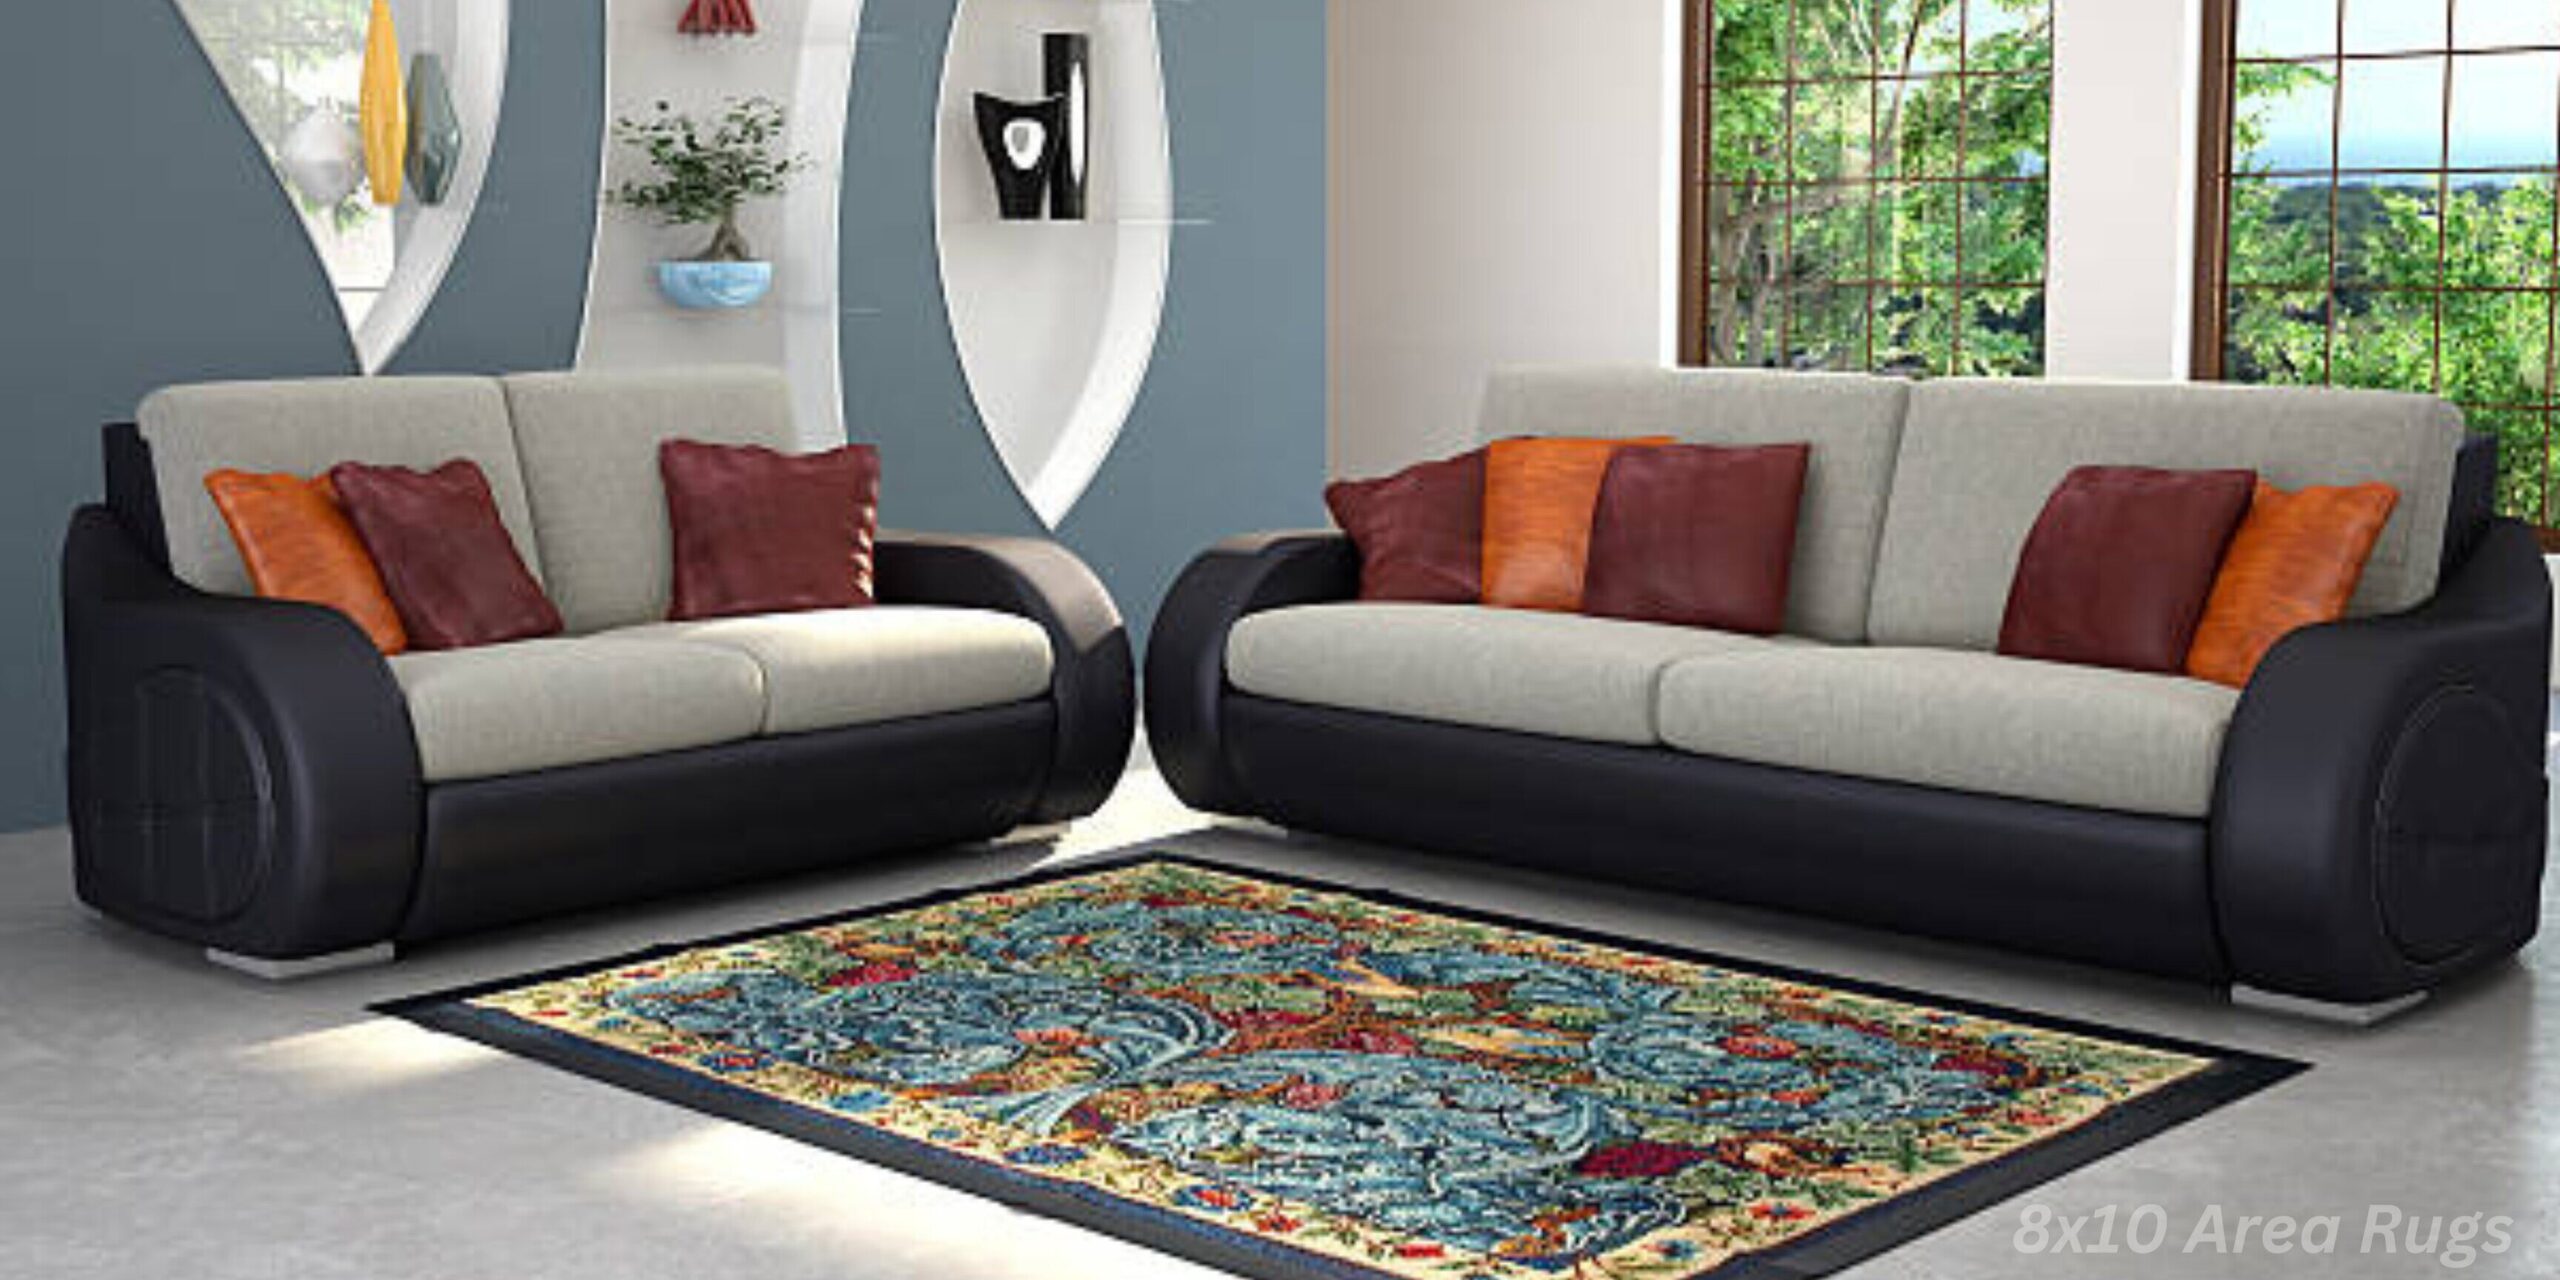 8×10 Area Rugs: Traditional, Modern, Shag, Natural Outdoor Fibers